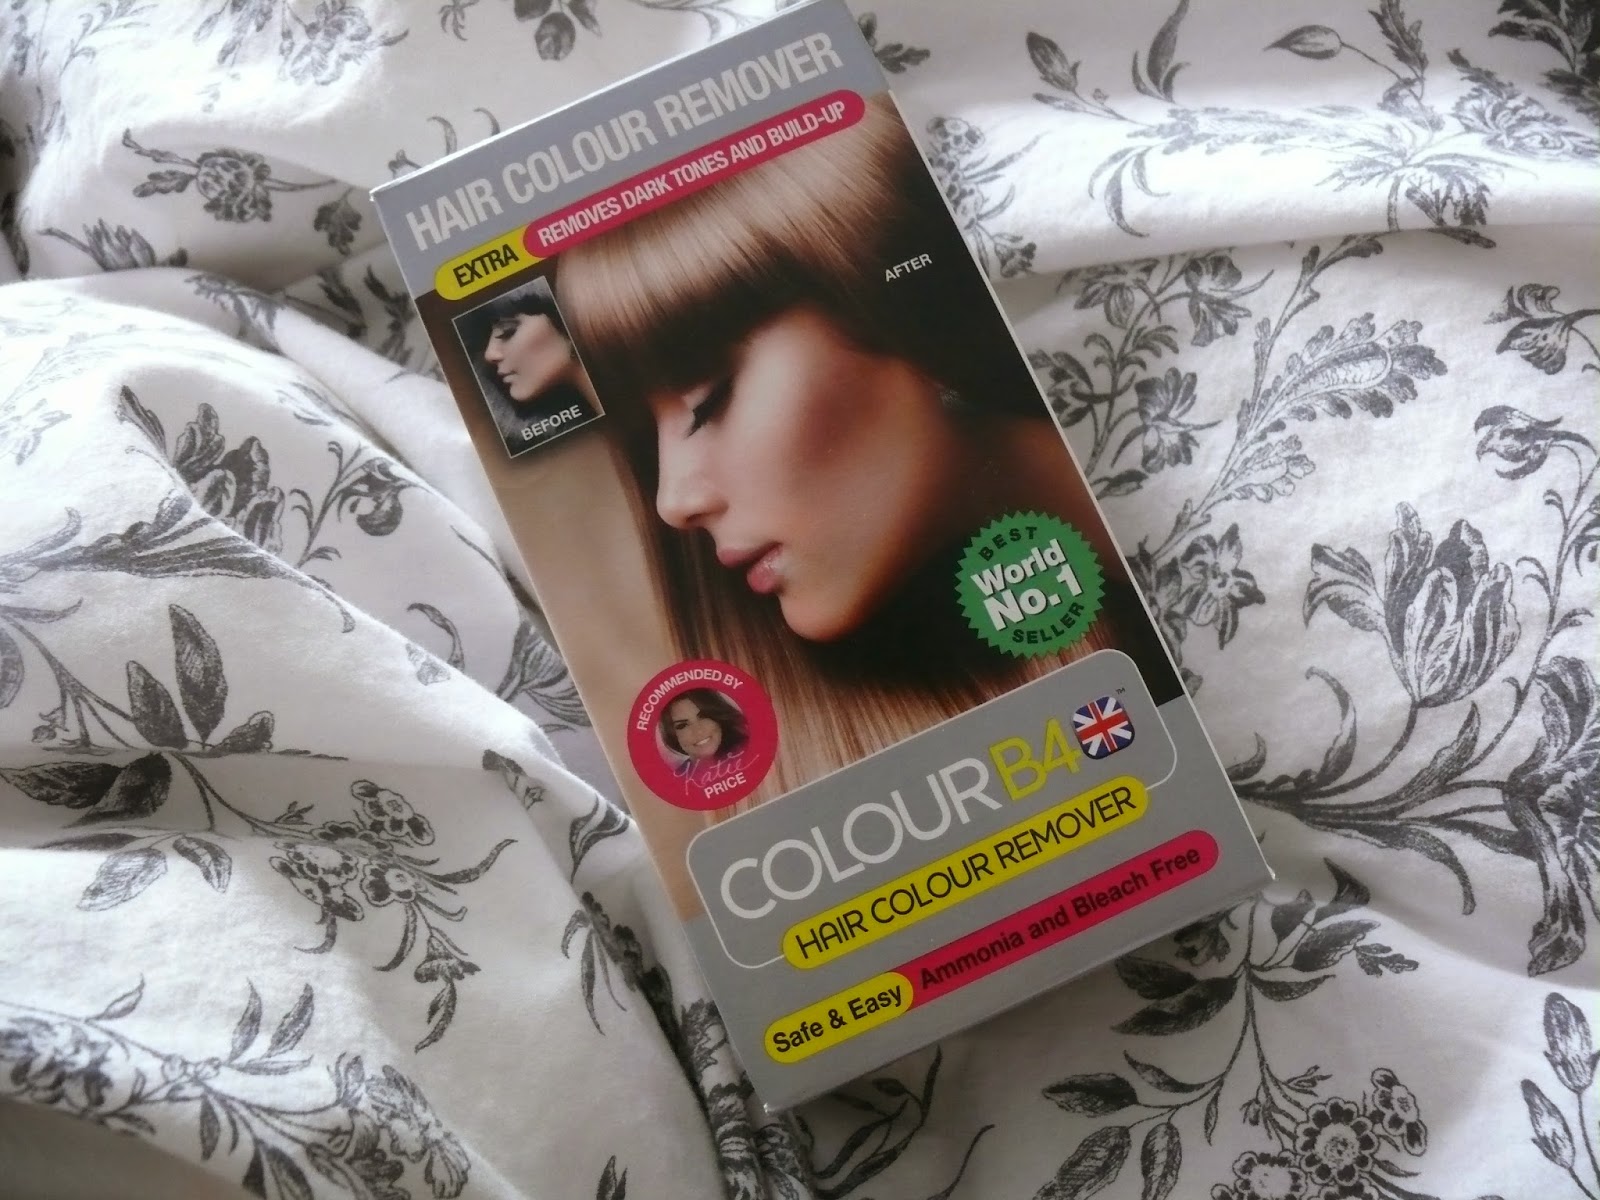 Colour B4 Hair Colour Remover Review: My Hair Turned Blue! - wide 9